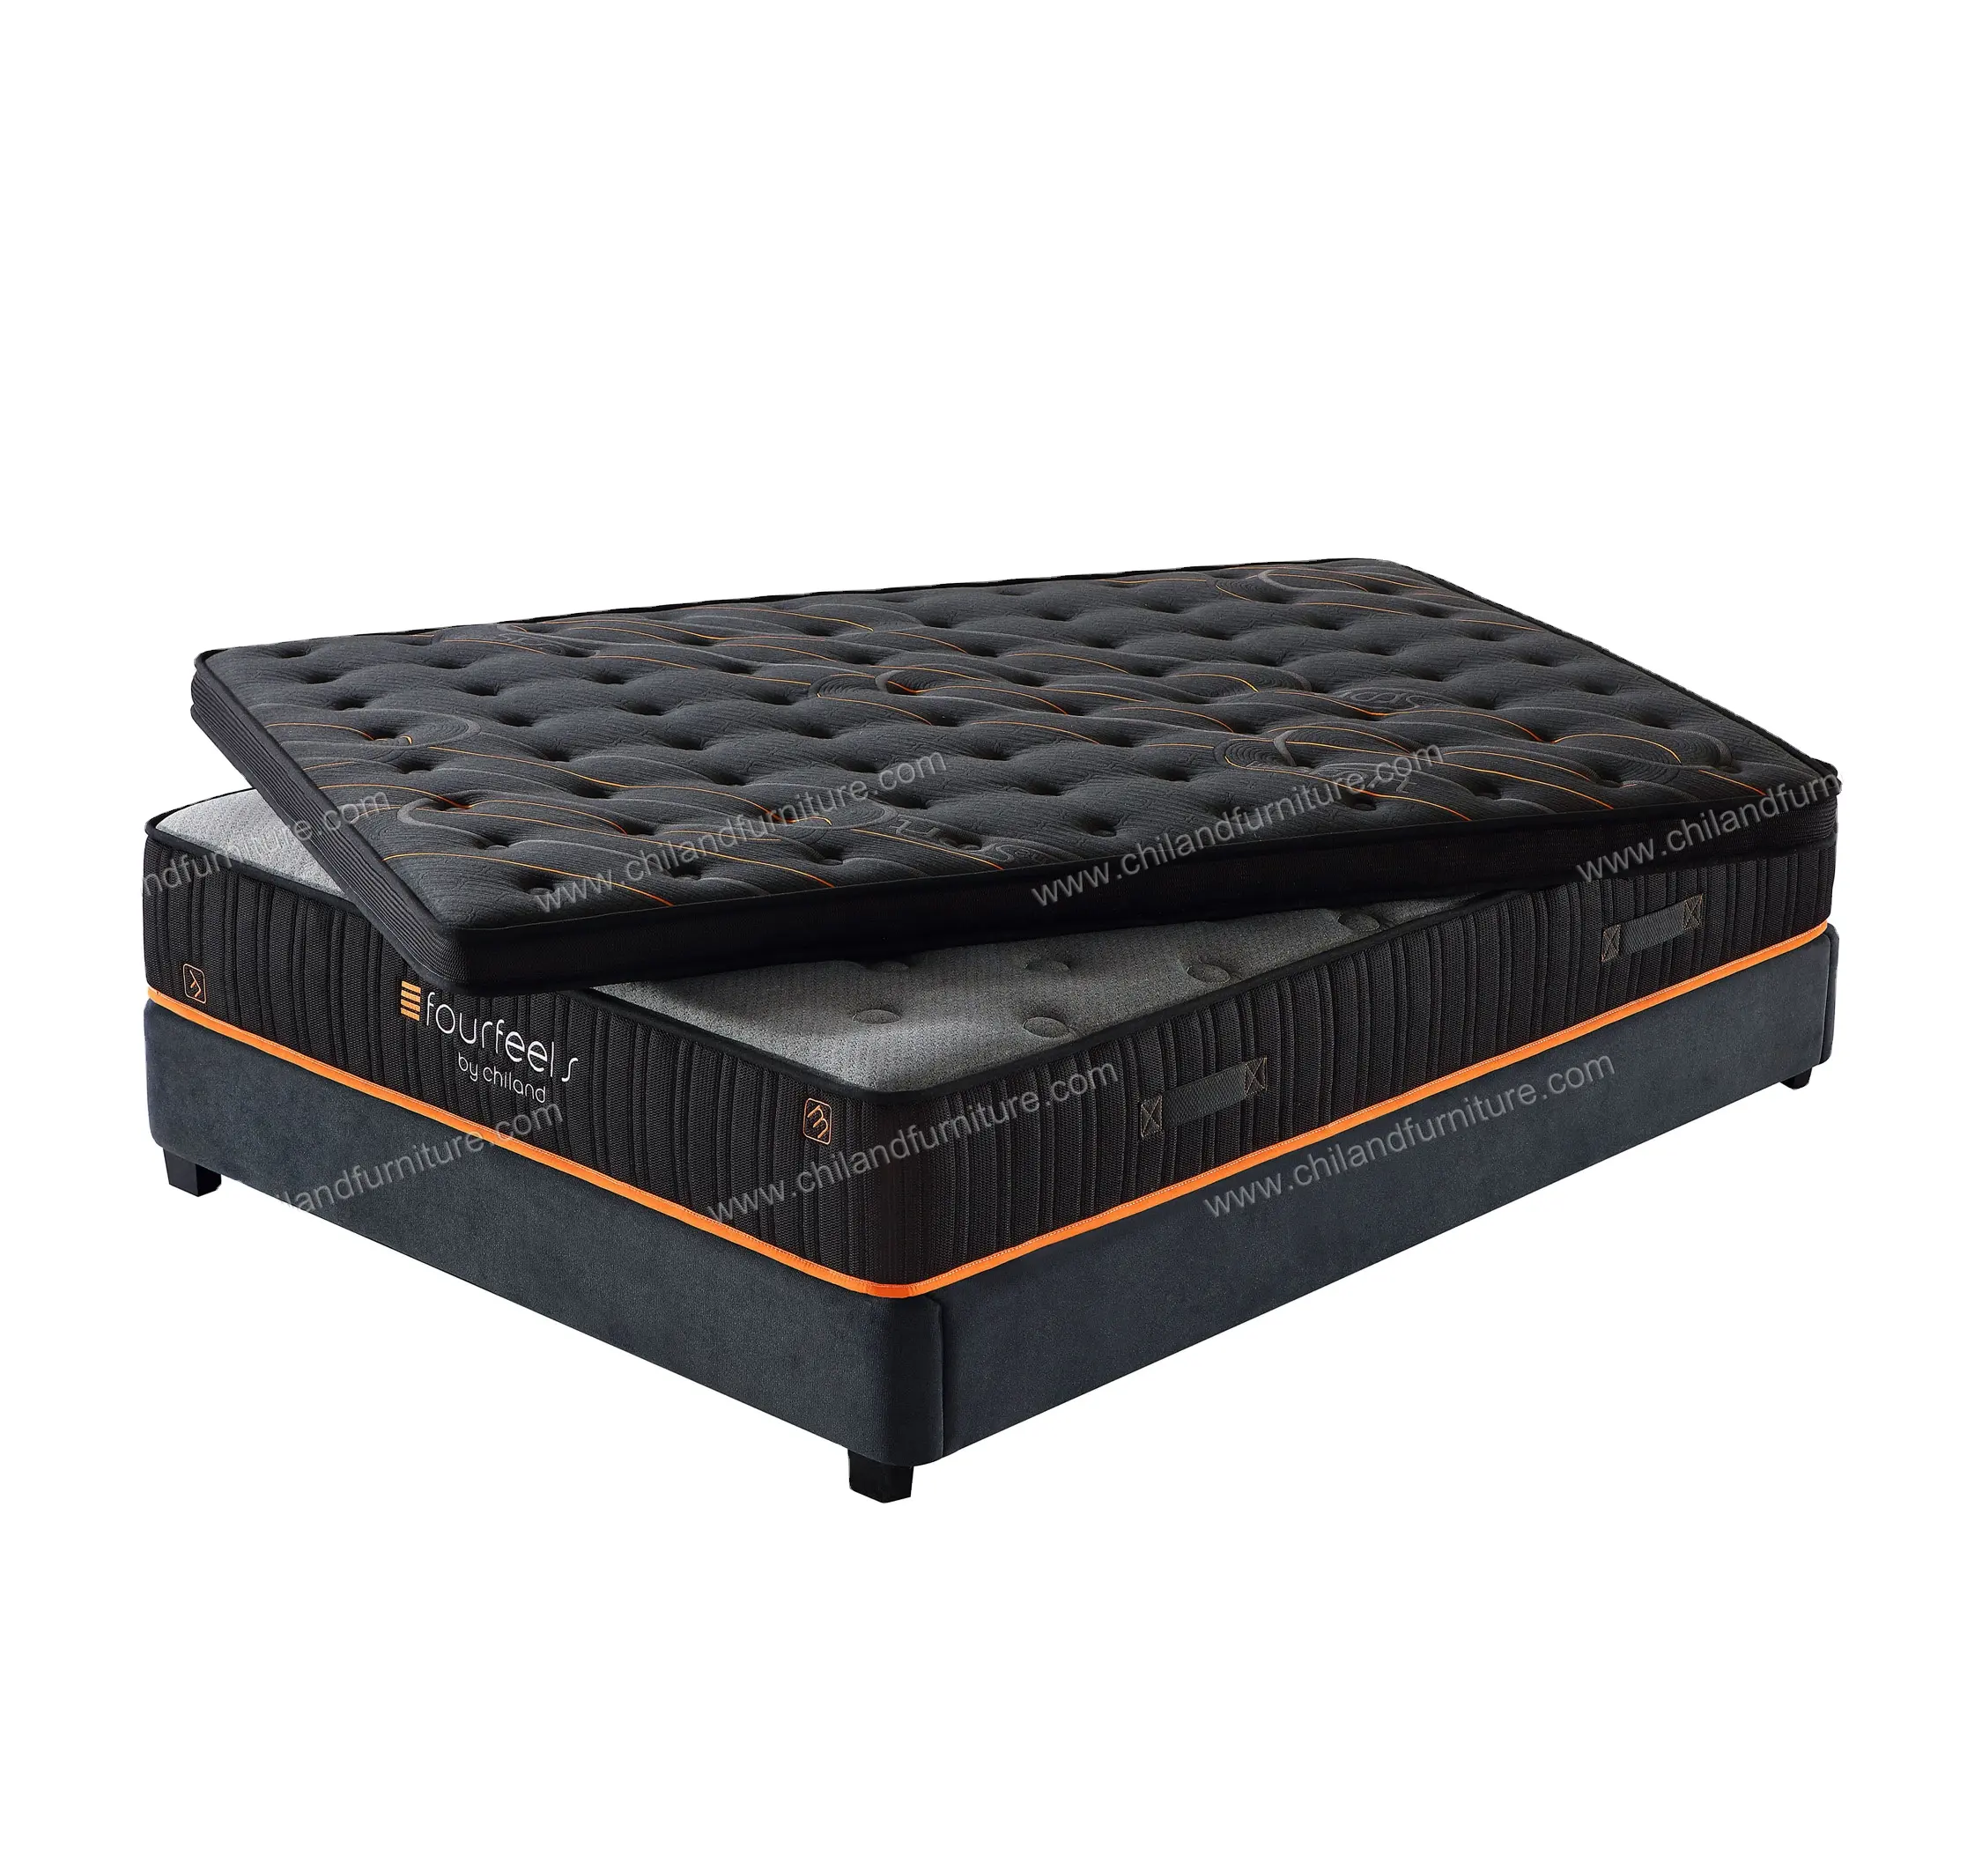 Cheap Price Inflatable Luxury Double Bed Memory Foam Mattress In A Box mattresses natural latex mattress